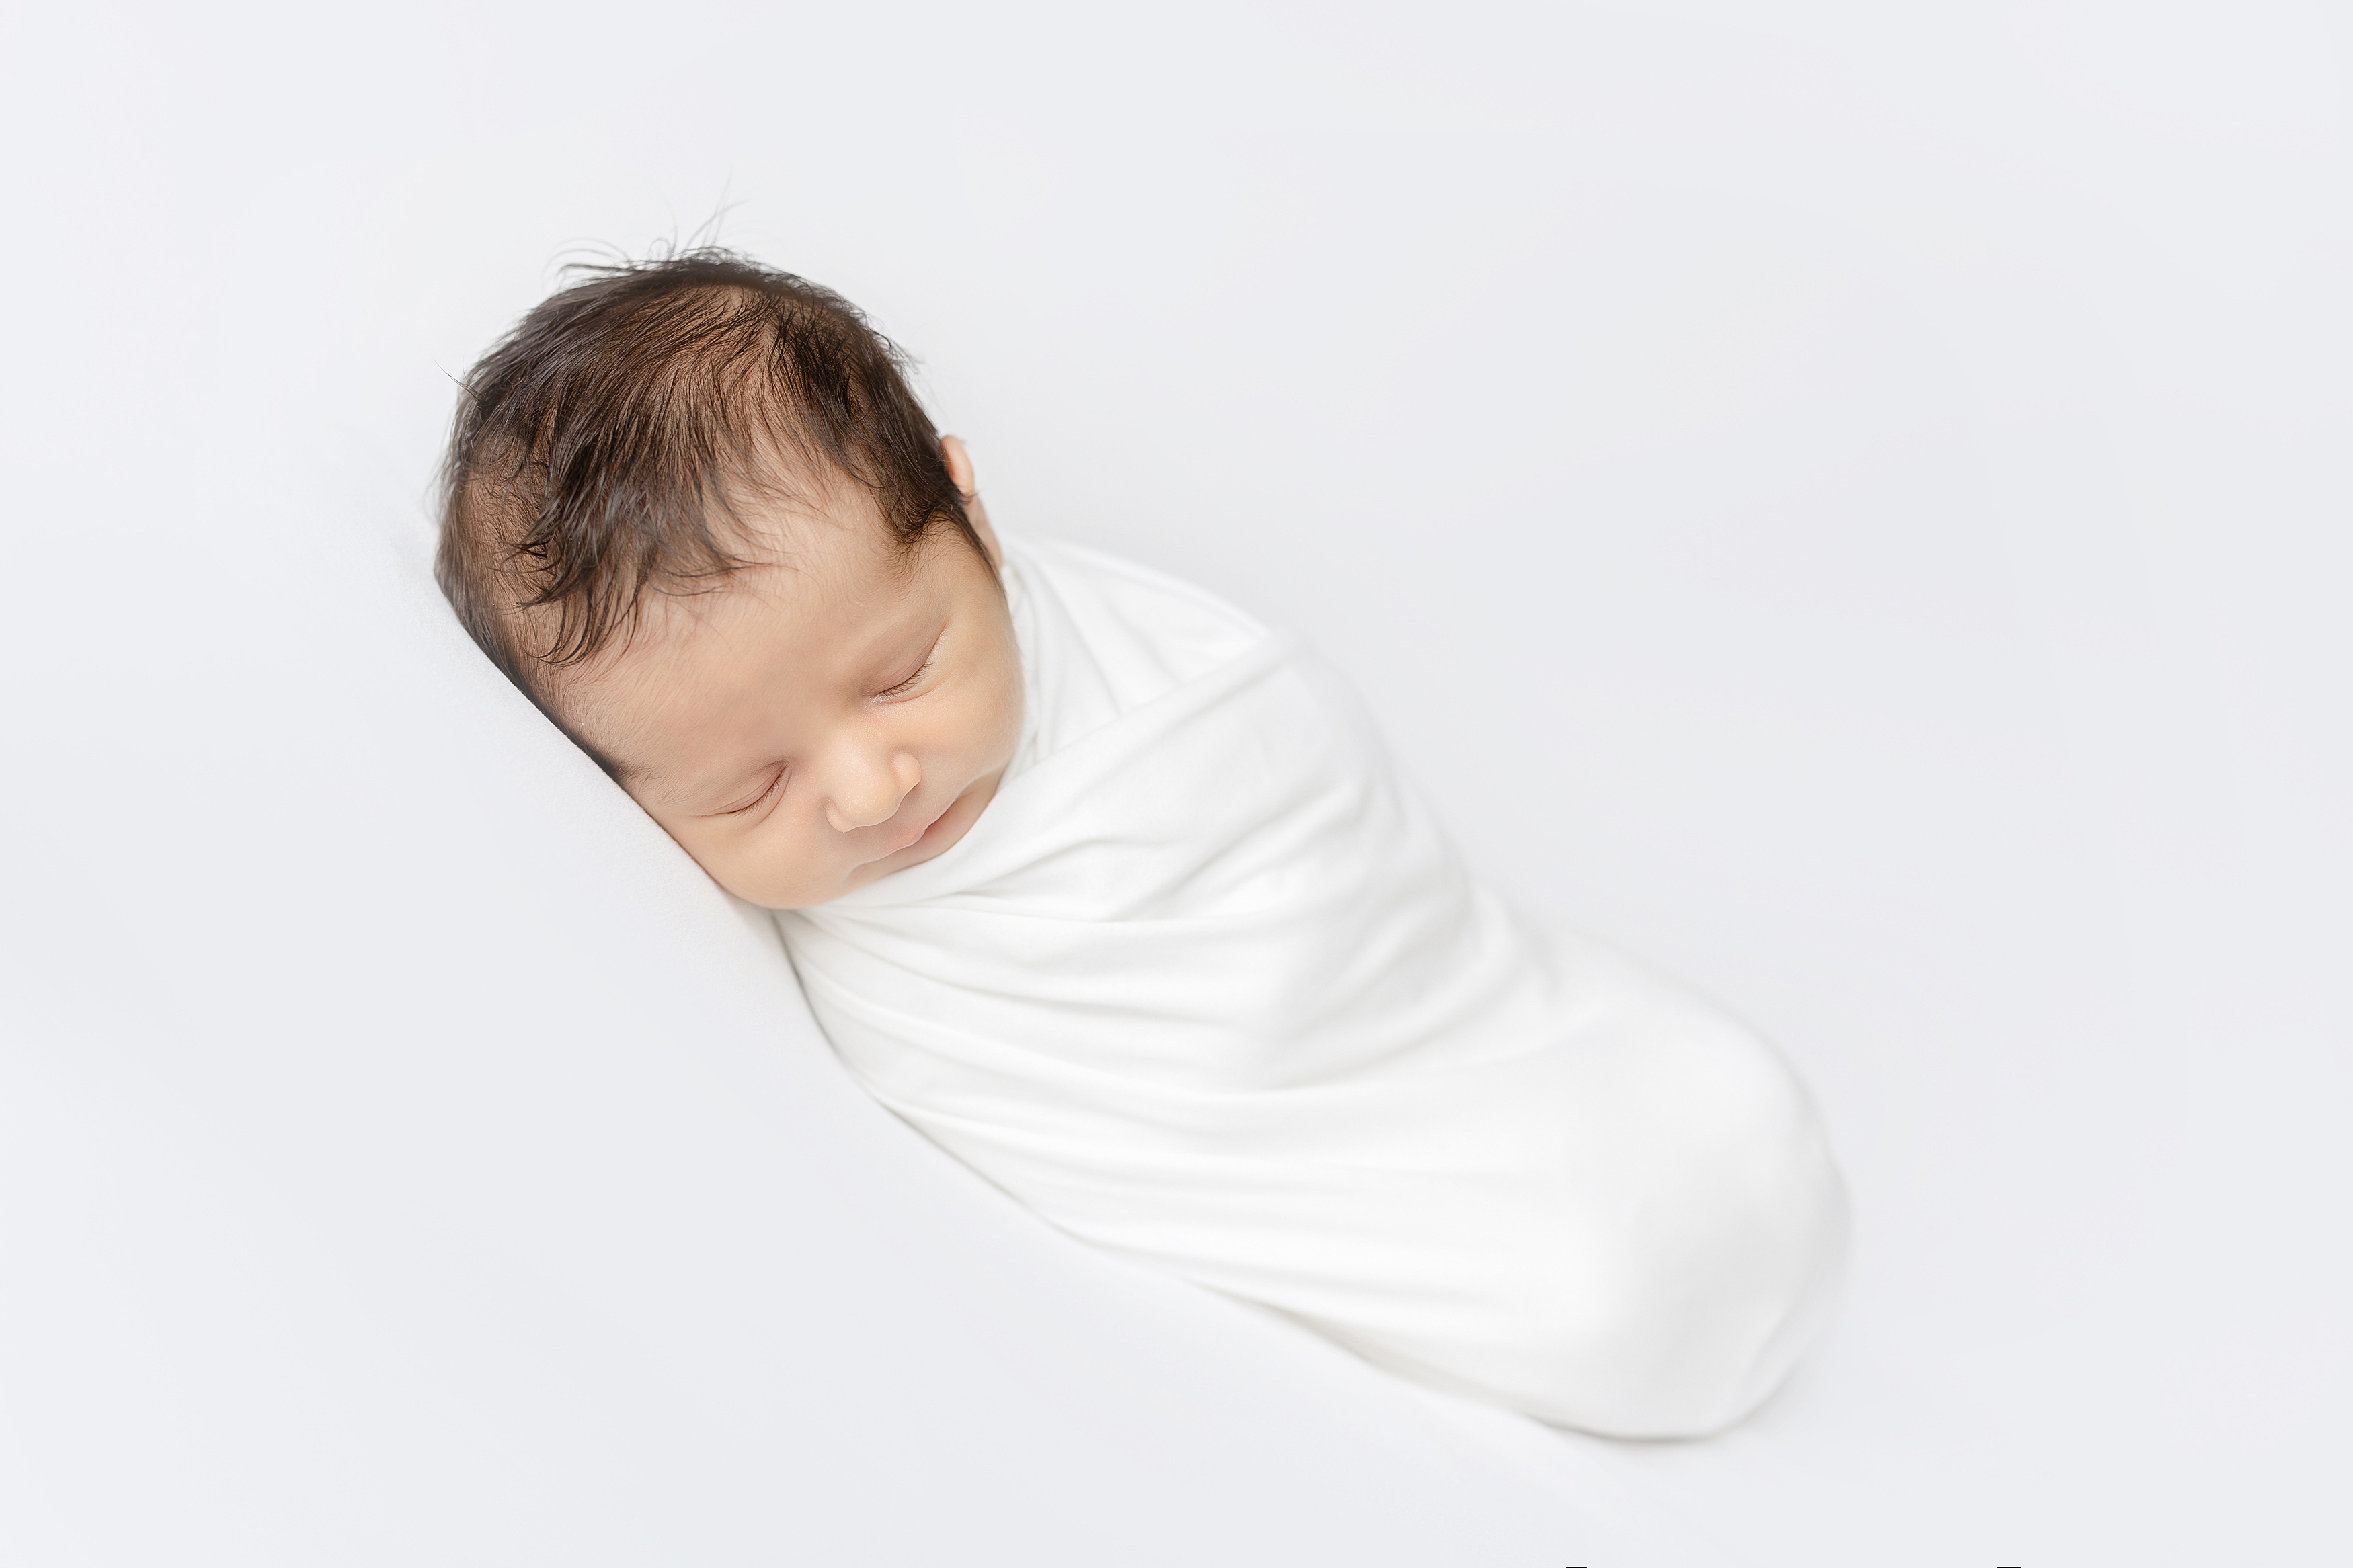 Posed newborn portrait of baby boy wrapped in white swaddle on white blanket.